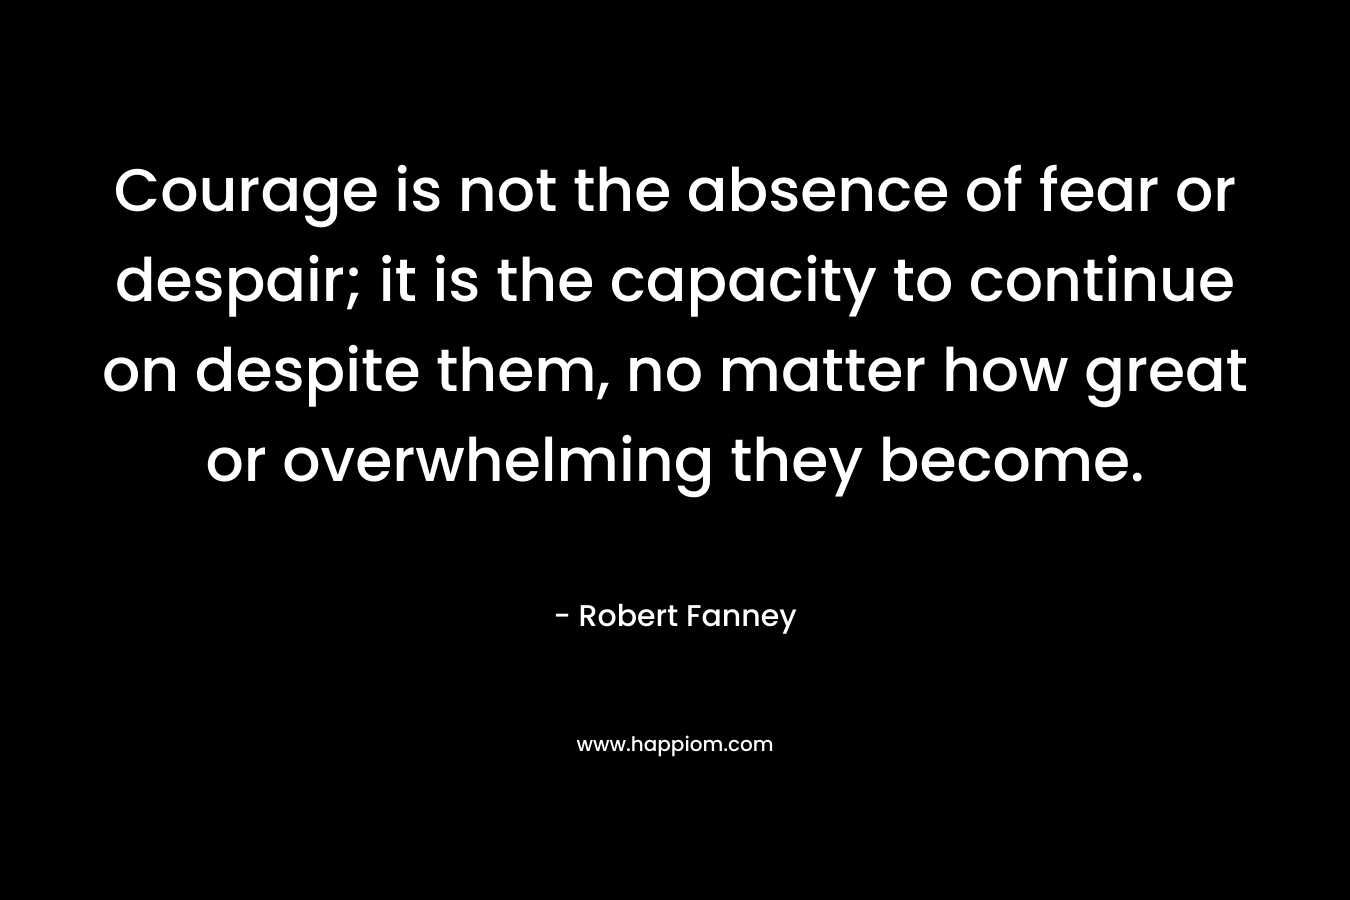 Courage is not the absence of fear or despair; it is the capacity to continue on despite them, no matter how great or overwhelming they become. – Robert Fanney